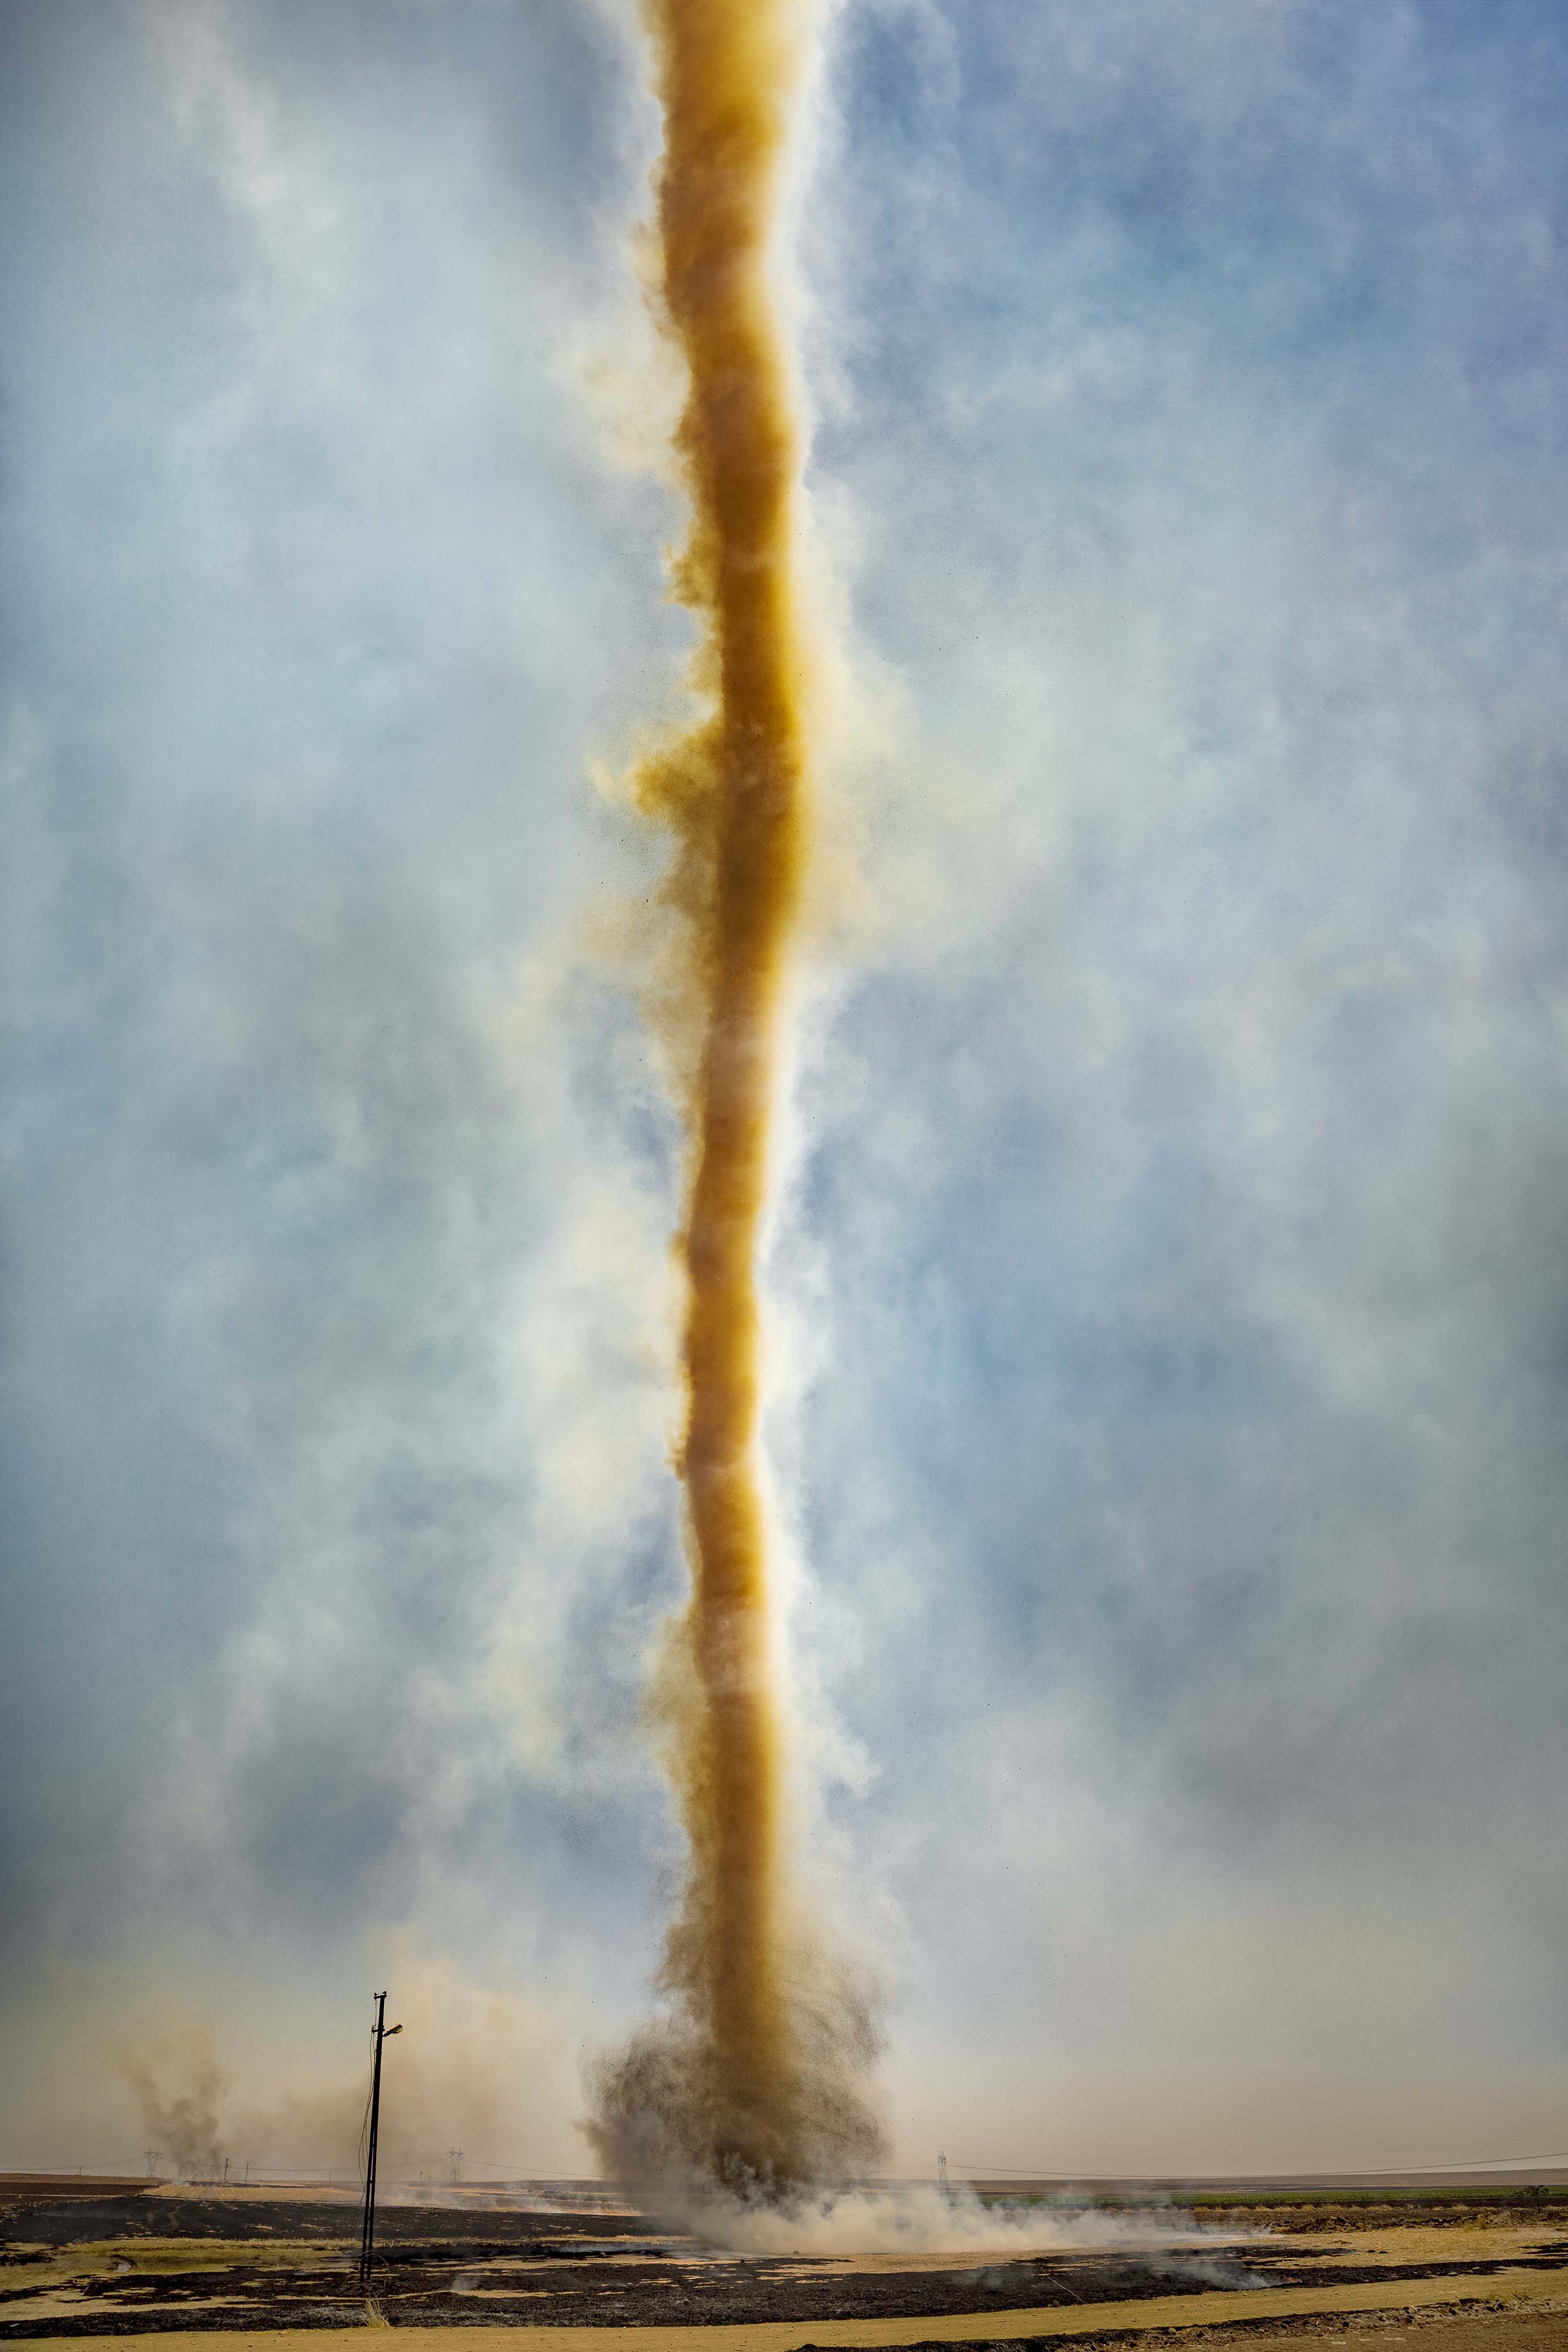 The shot that gave its name to the exhibition. "Sand in a Whirlwind", 2015, by Sinem Disli; "A Pillar of Smoke" exhibition (photo: courtesy of the artist)